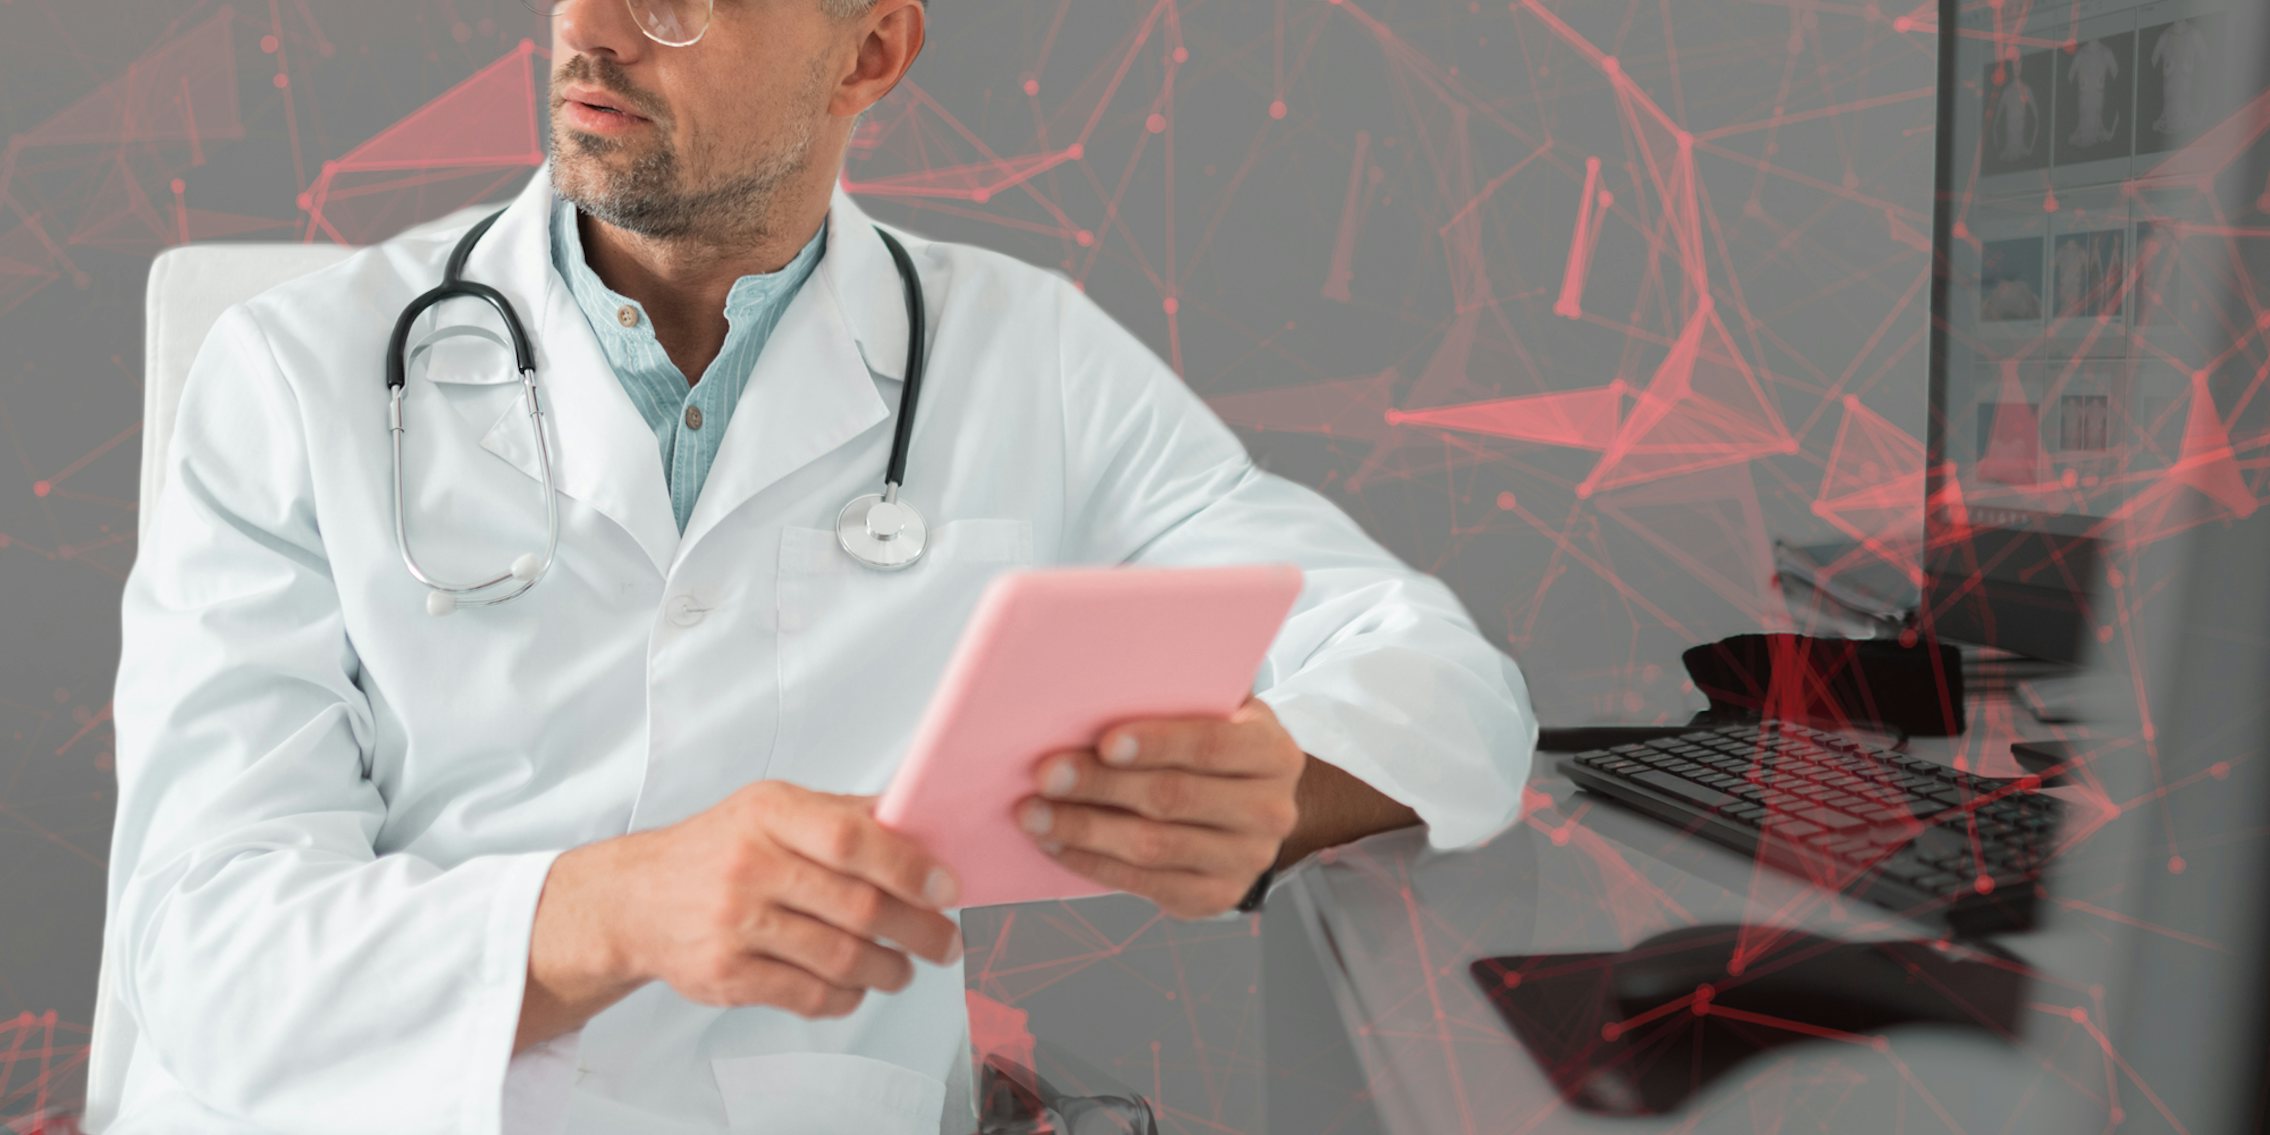 plastic surgeon at desk with red data leak overlay